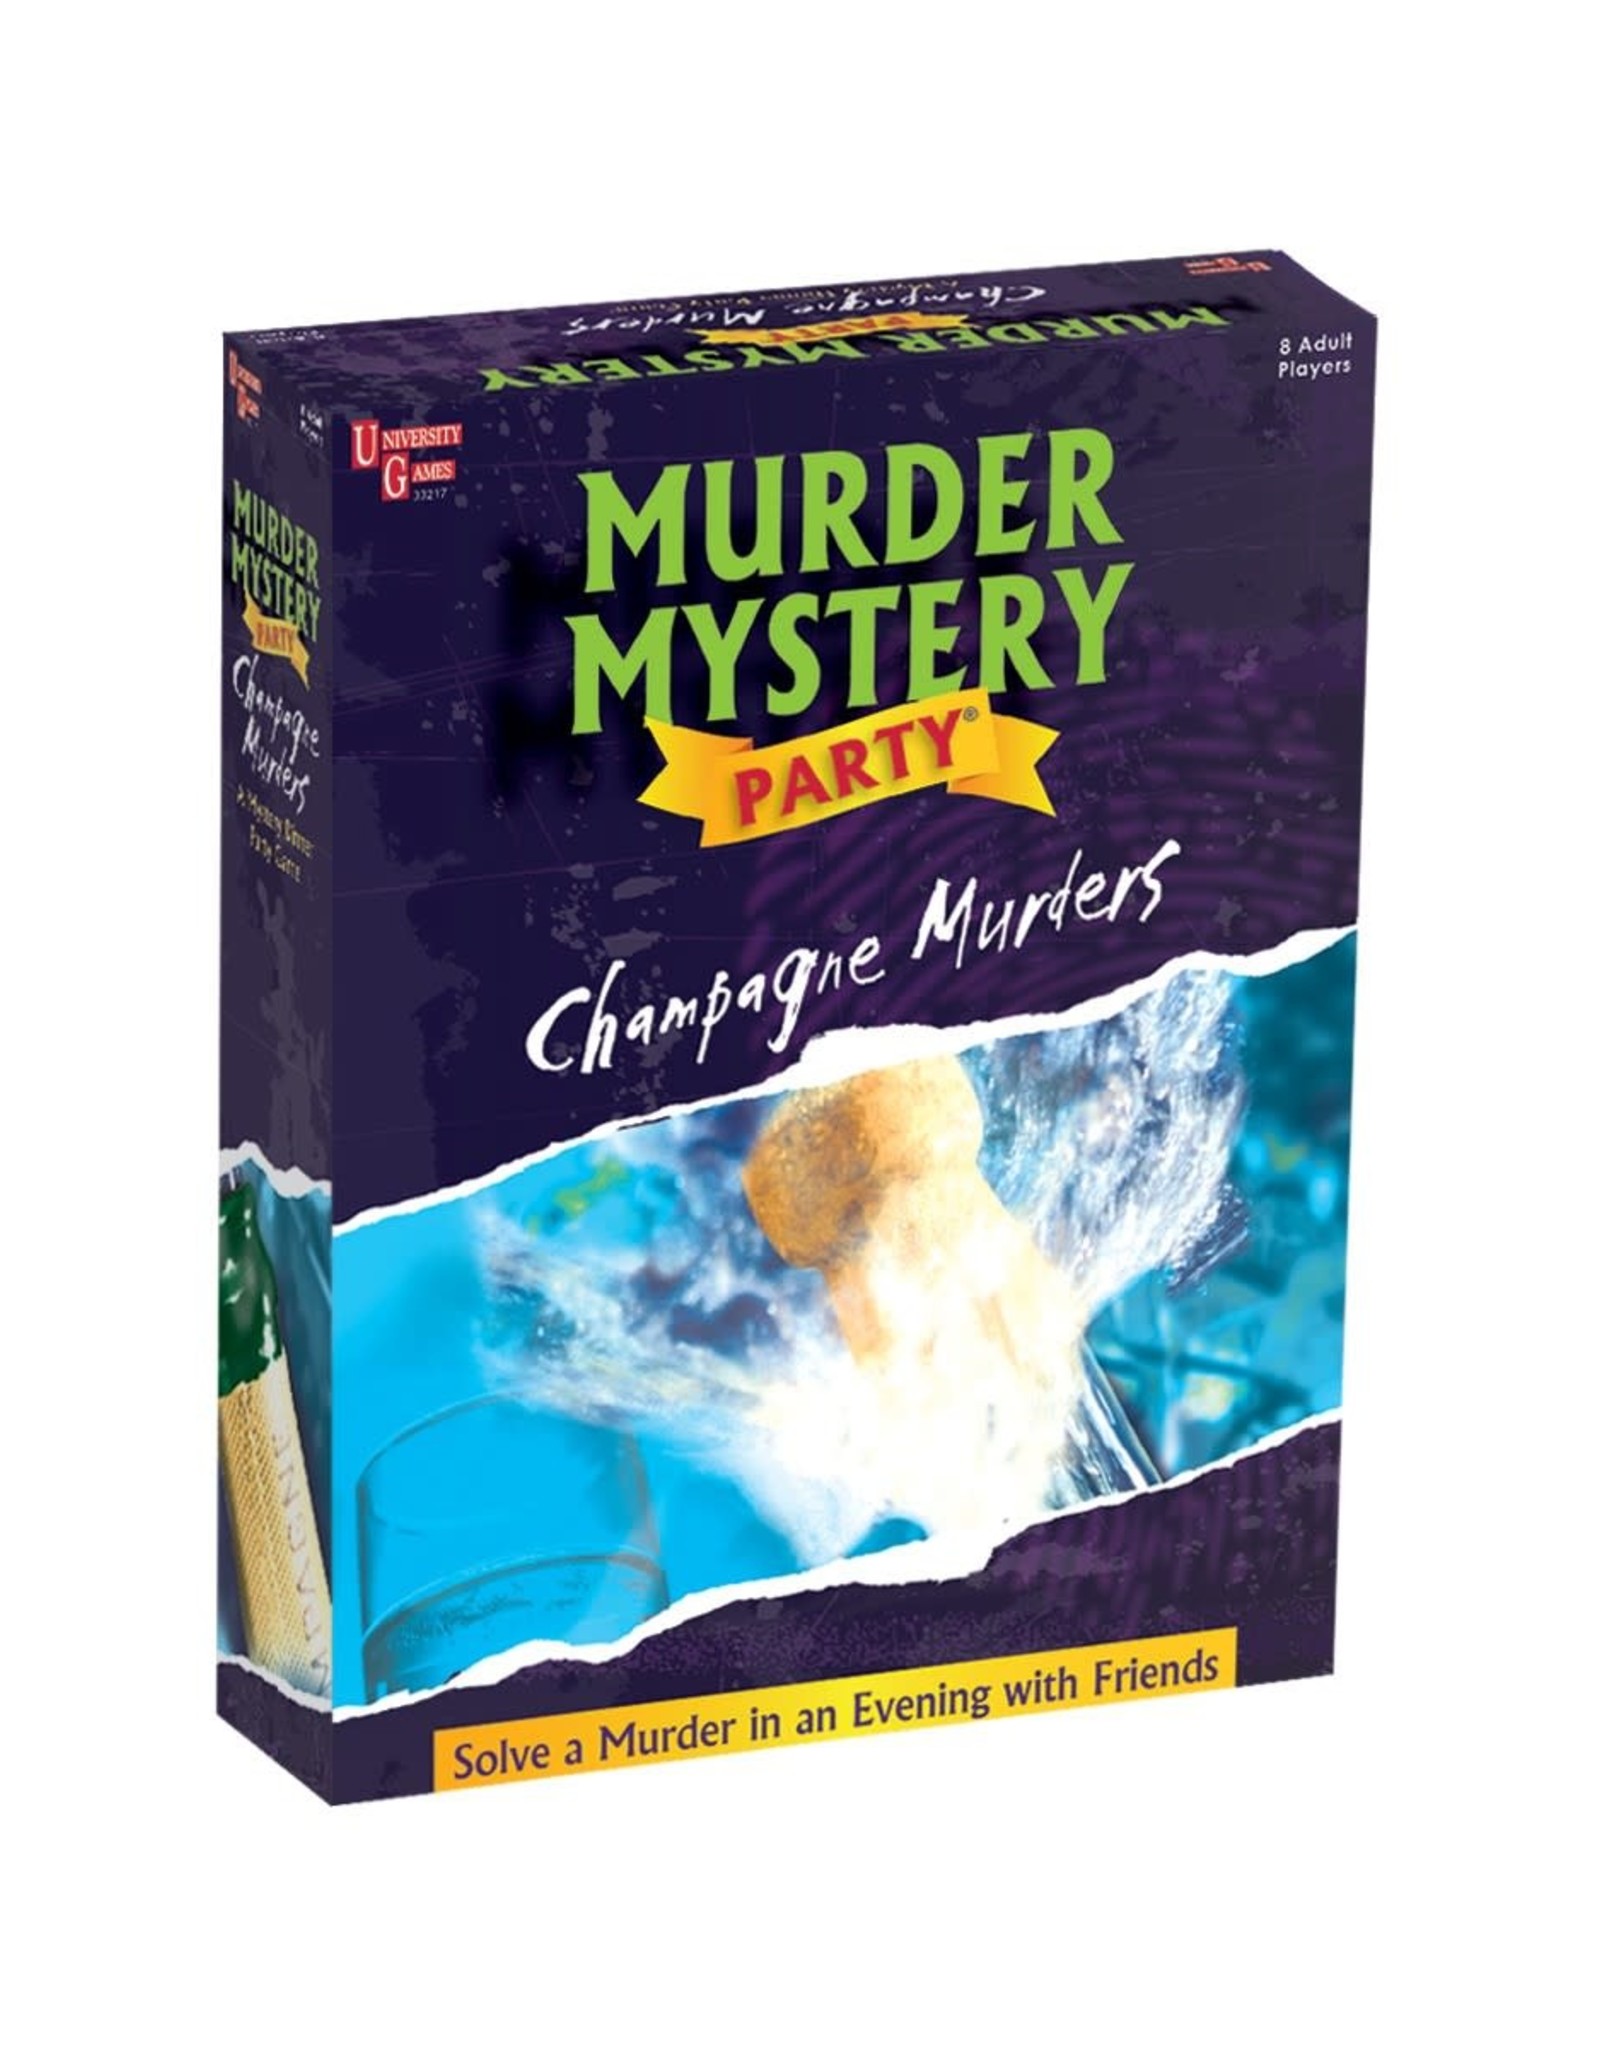 The Champagne Murder - Murder Mystery Party Game